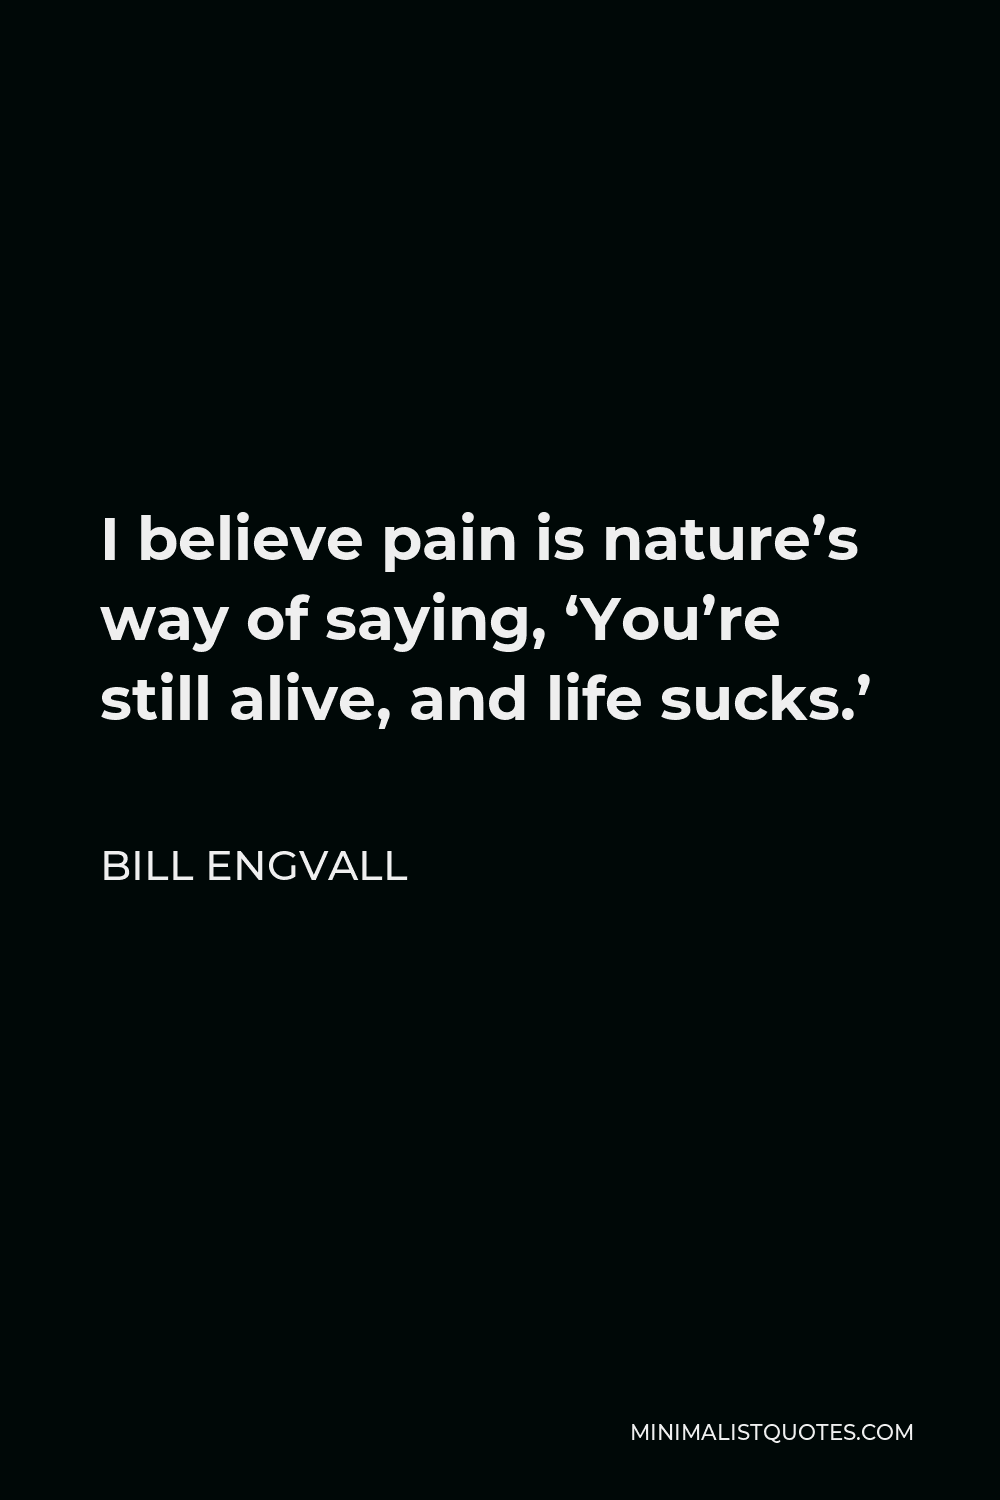 Bill Engvall Quote - I believe pain is nature’s way of saying, ‘You’re still alive, and life sucks.’